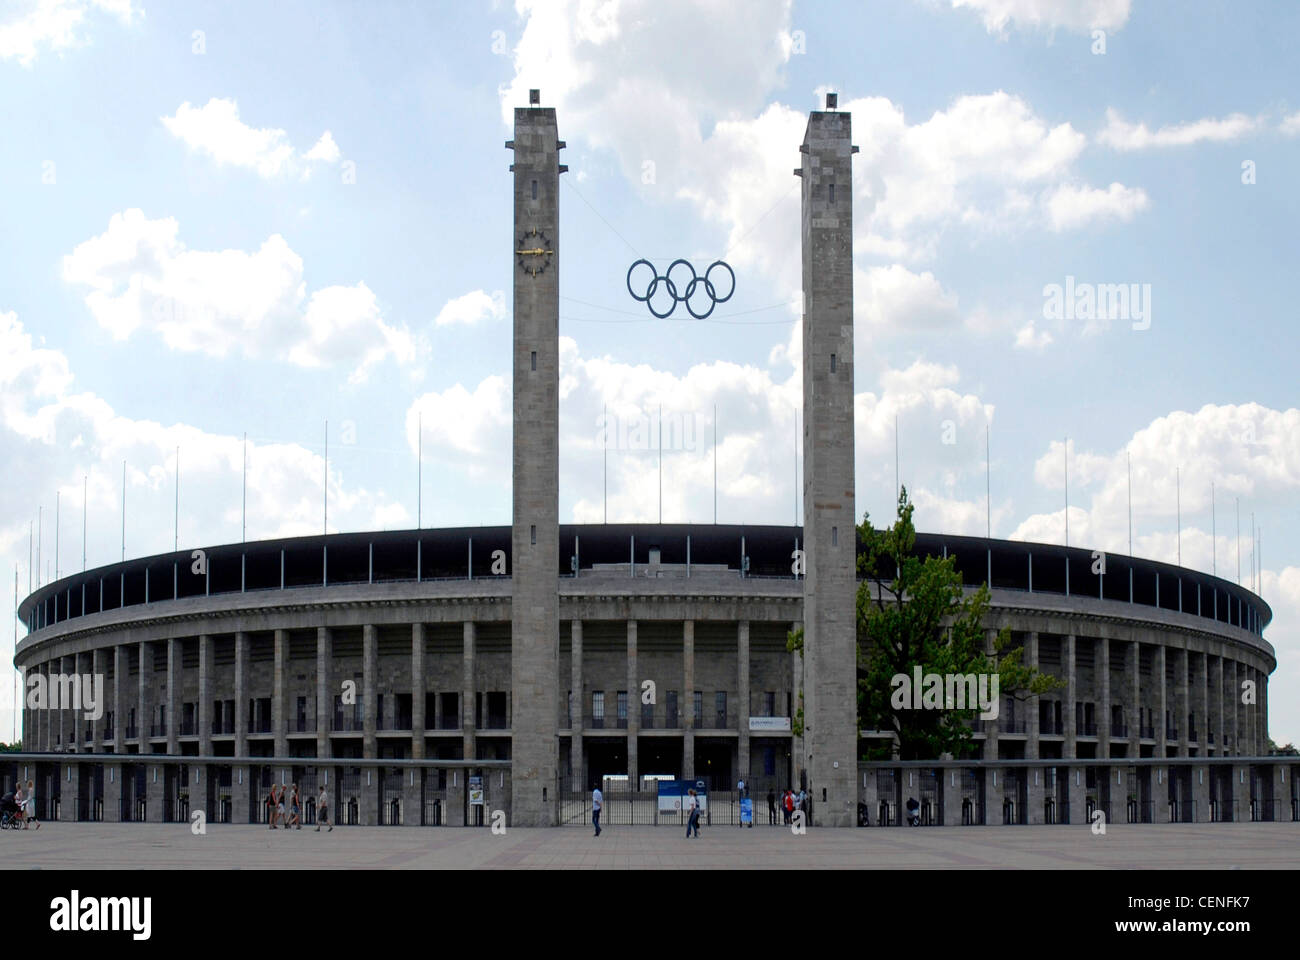 Olympic stadium in Berlin with the Olympic rings over the main entrance. Stock Photo